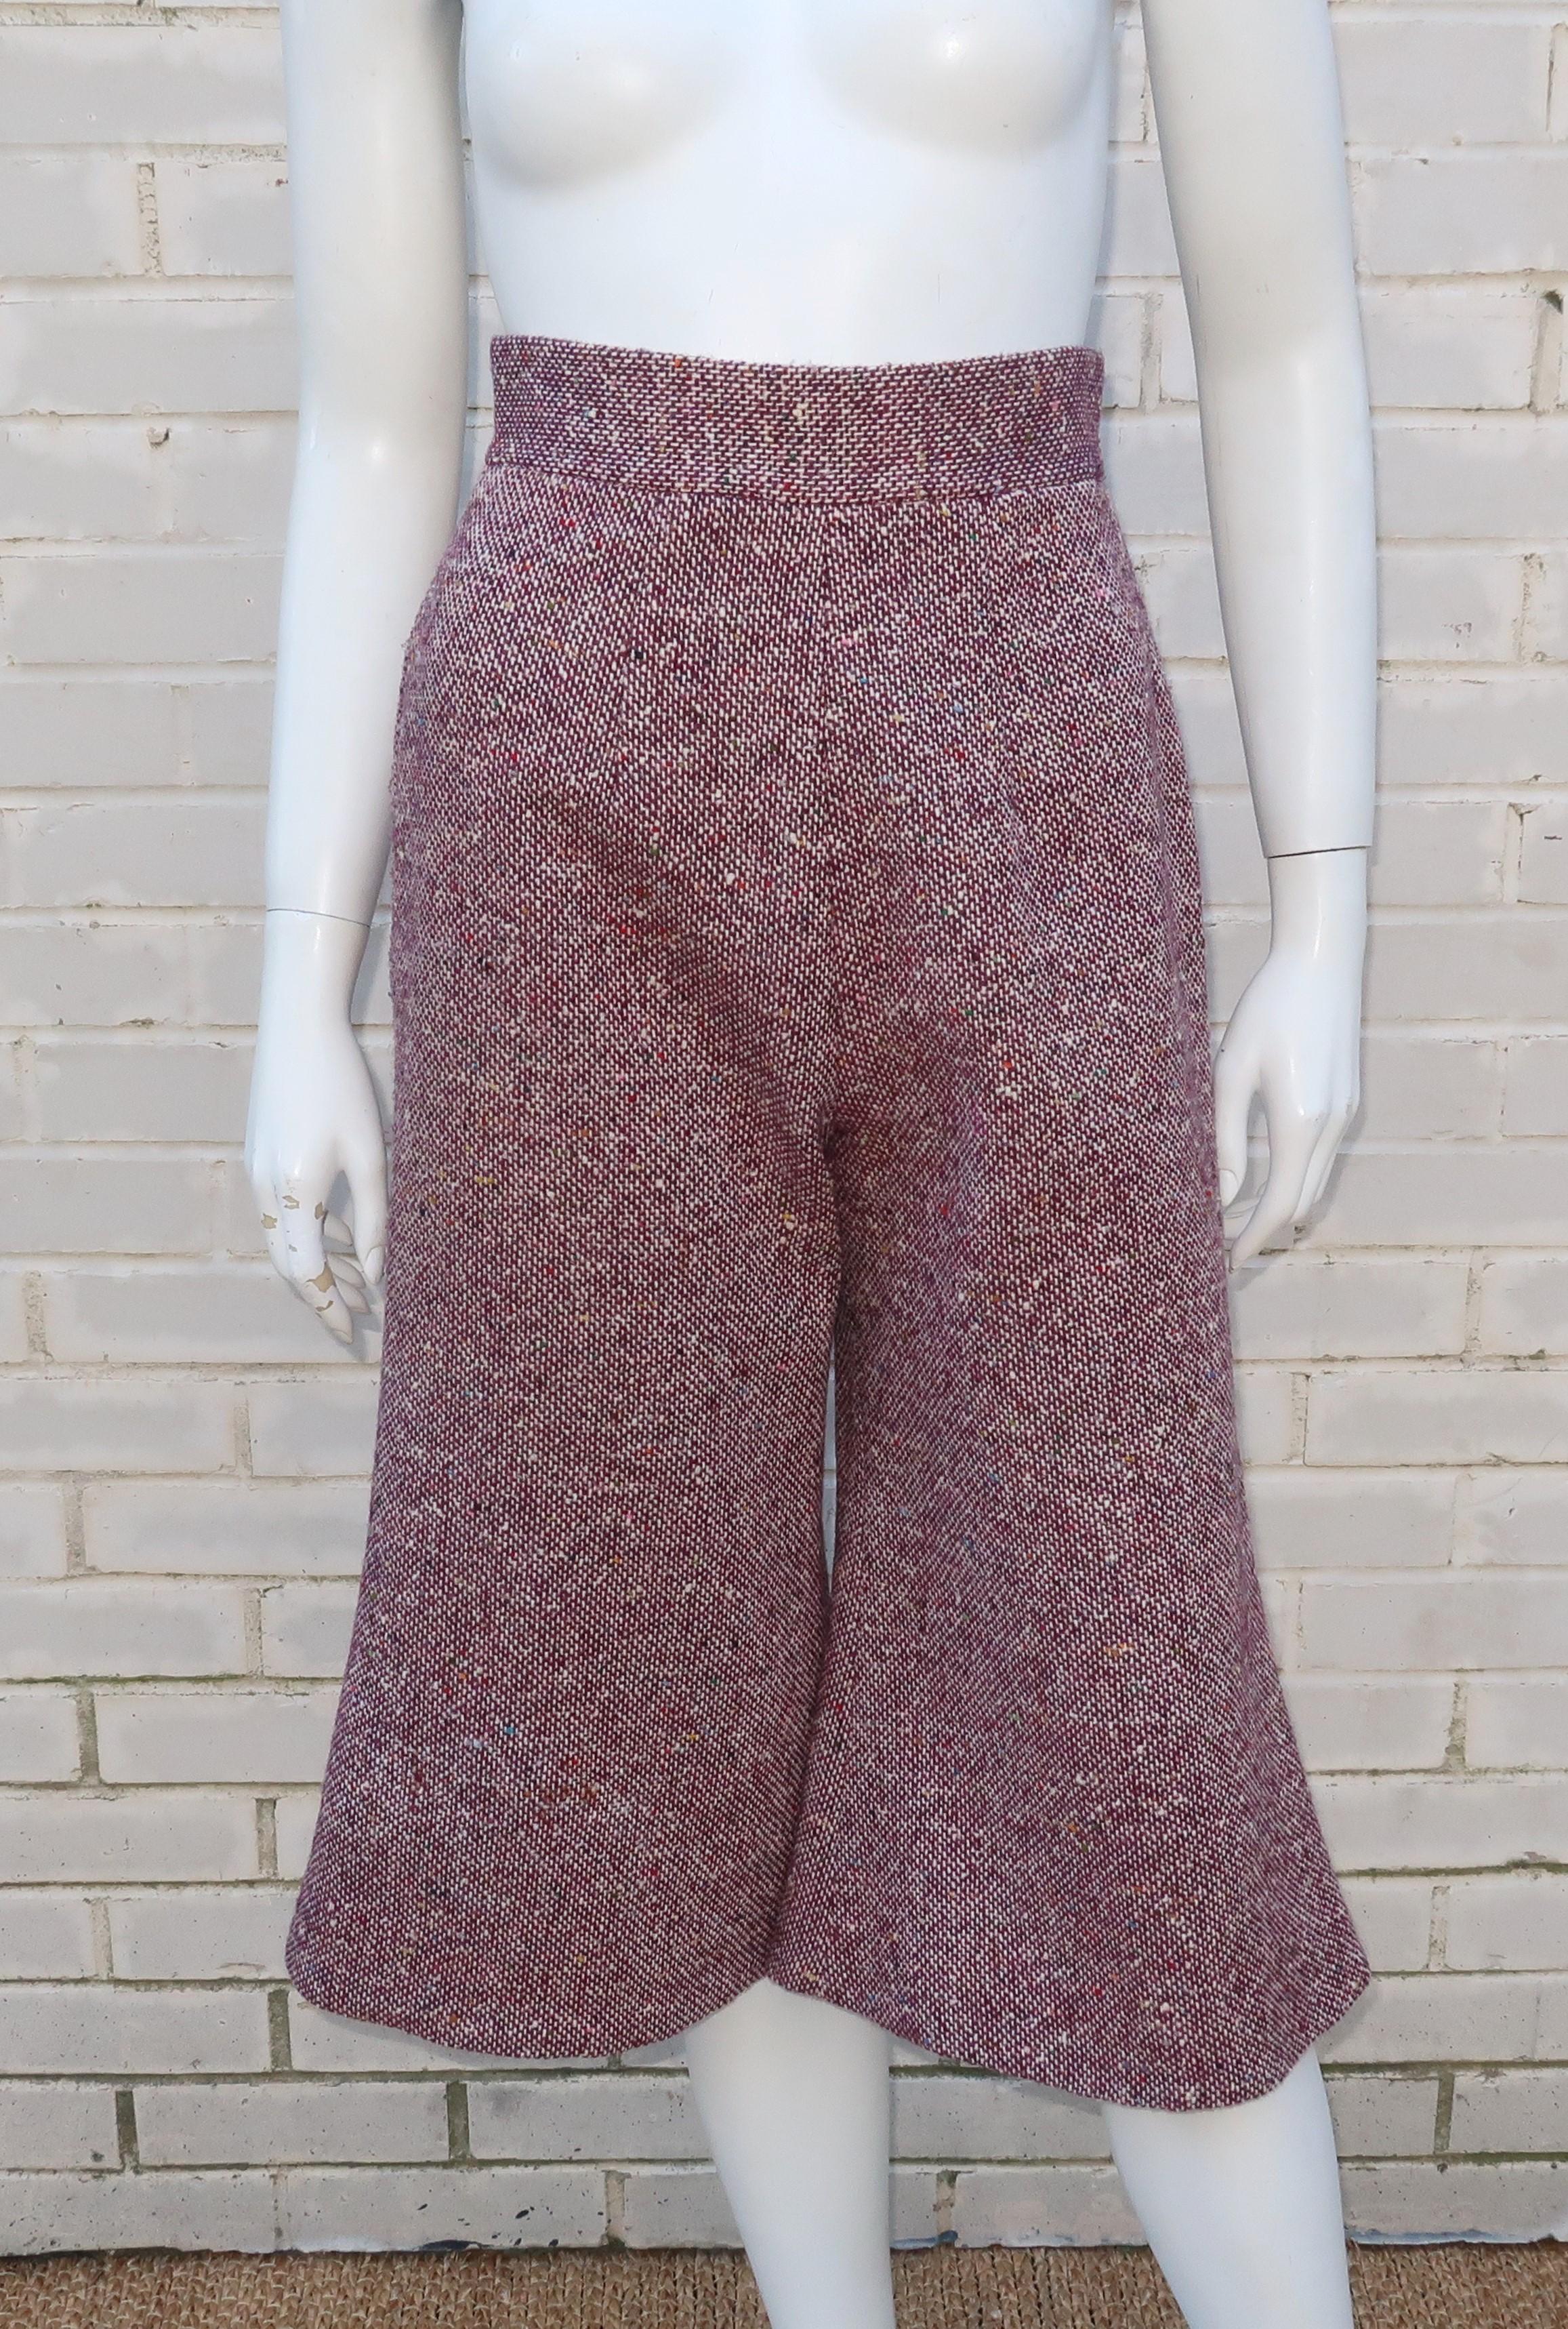 Mod C.1970 Young Victorian Ruby Red Velvet & Wool Tweed Jacket Pant Suit 6